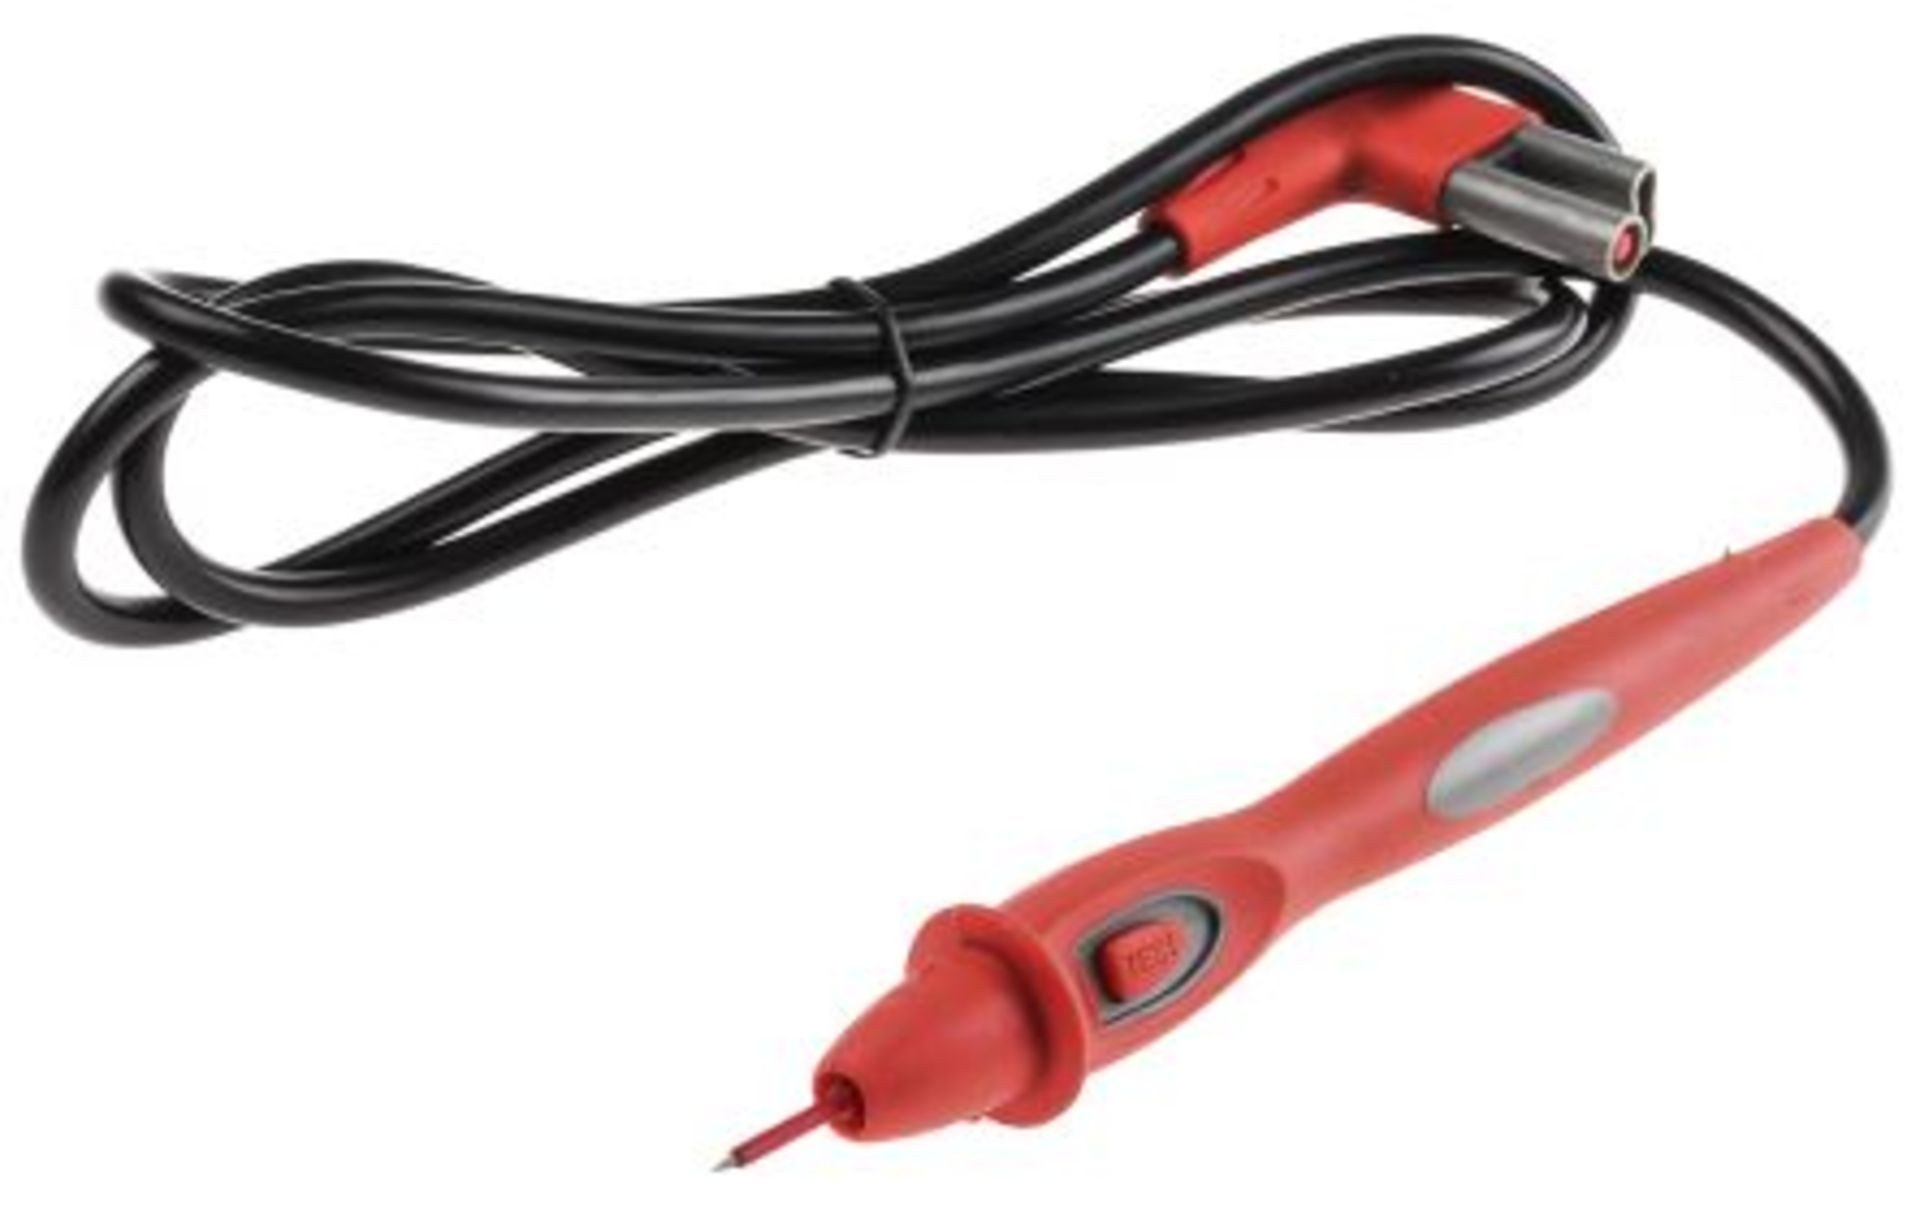 APPA ATL-R1 Insulation Tester Probe, For Use With IIT1500 Series